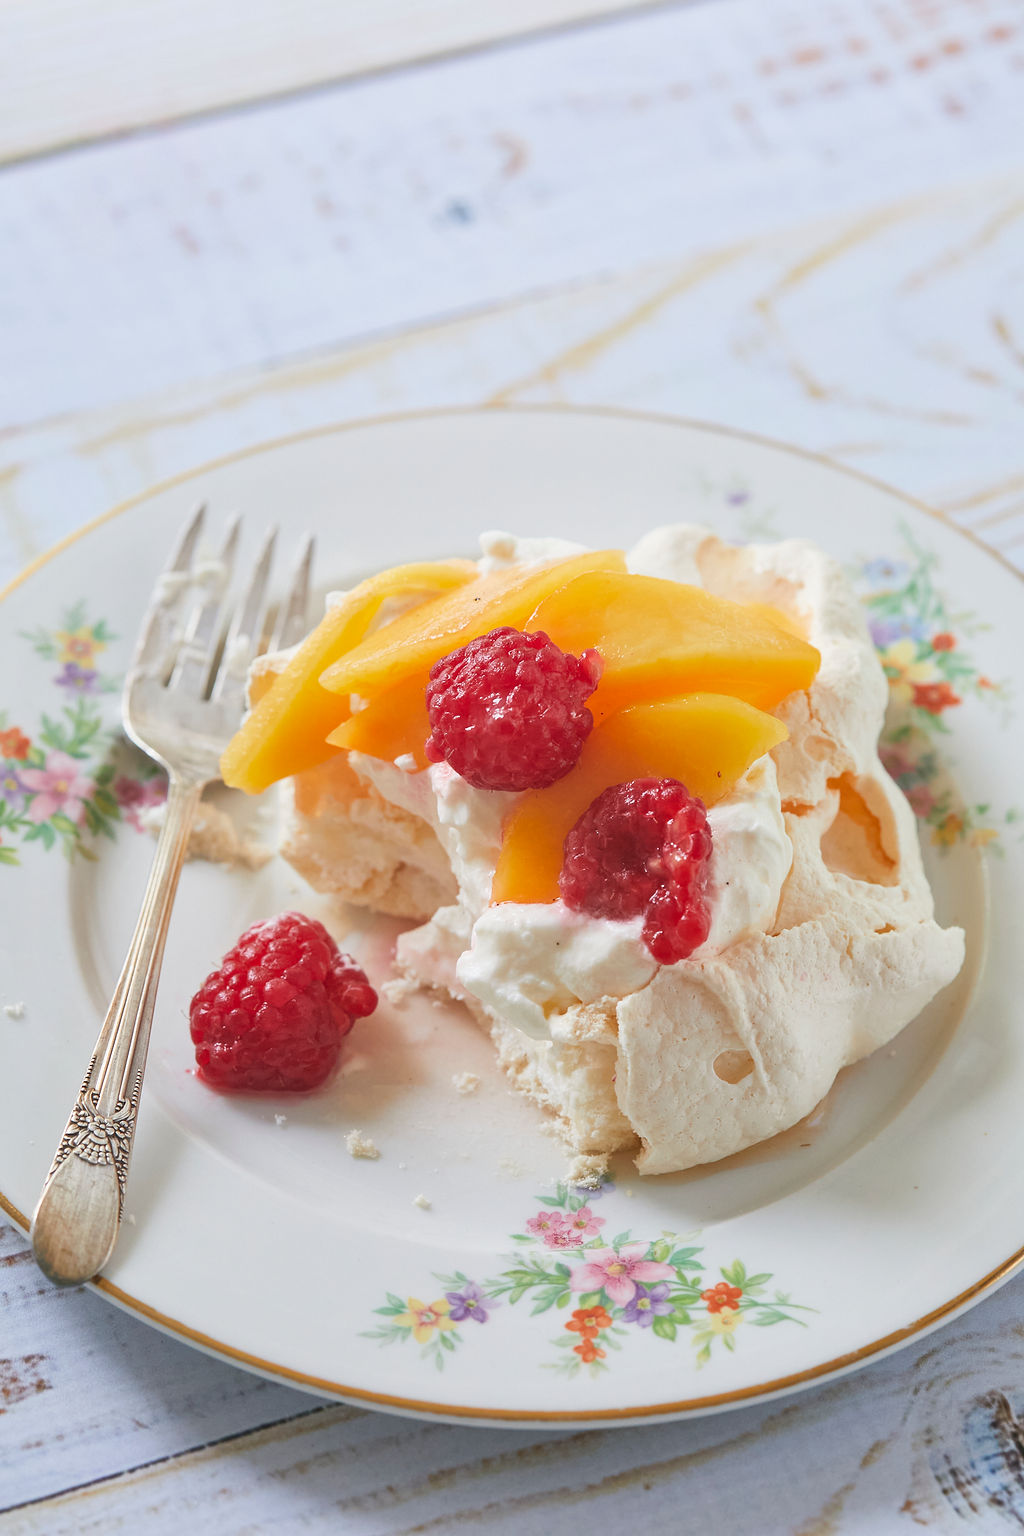 A close up of my meringues recipe, showing texture and my peach and raspberry compote.